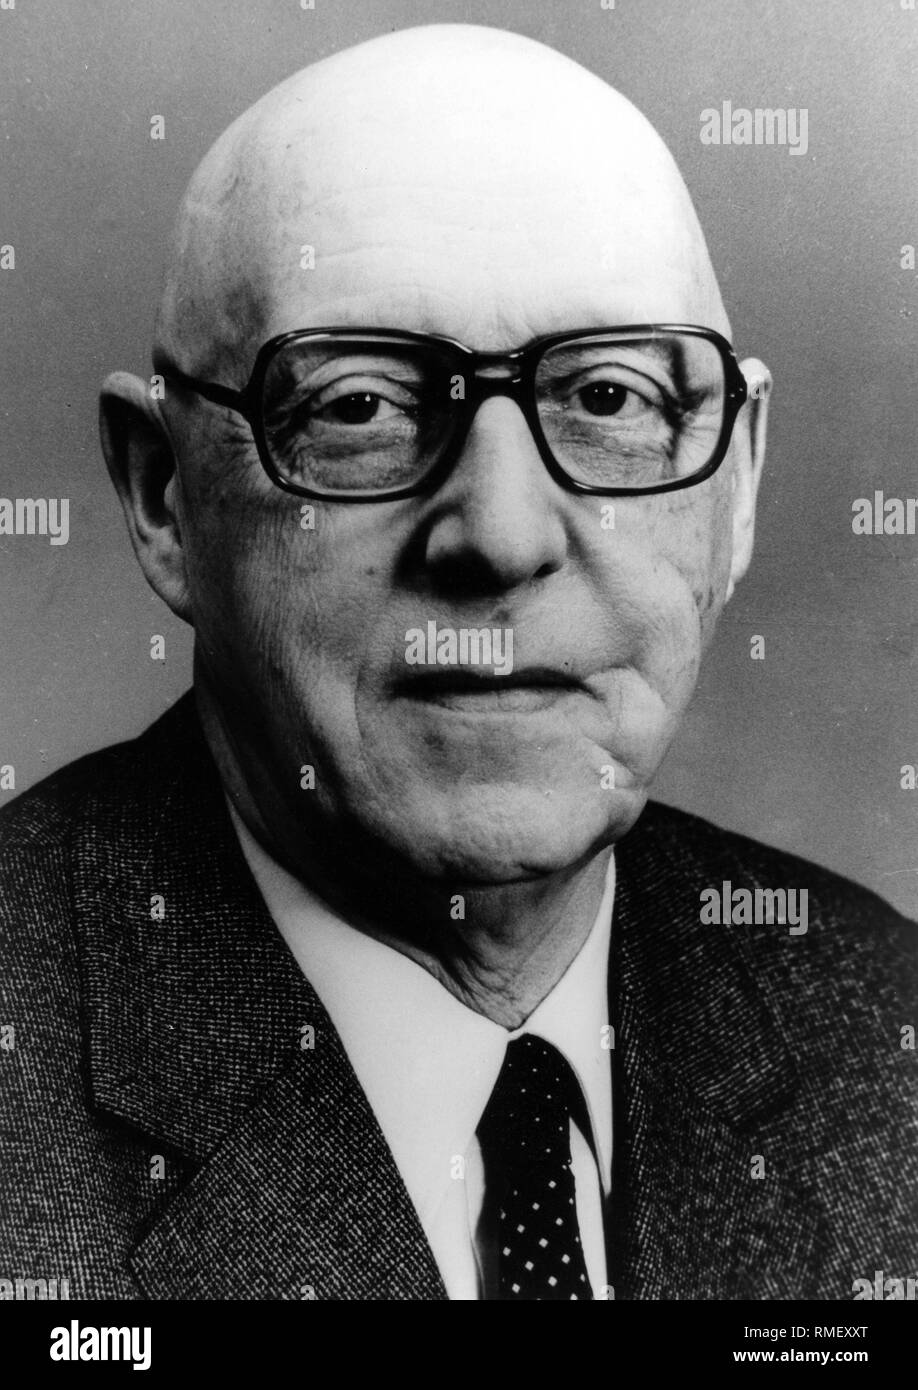 Heinrich Homann (06.03.1911 - 1994) between 1972 - 1990 was Chairman of the NDPD, between 1949 - 1989 Member of the People's Chamber , between 1960 - 1990 deputy GDR State Council Chairman. Stock Photo